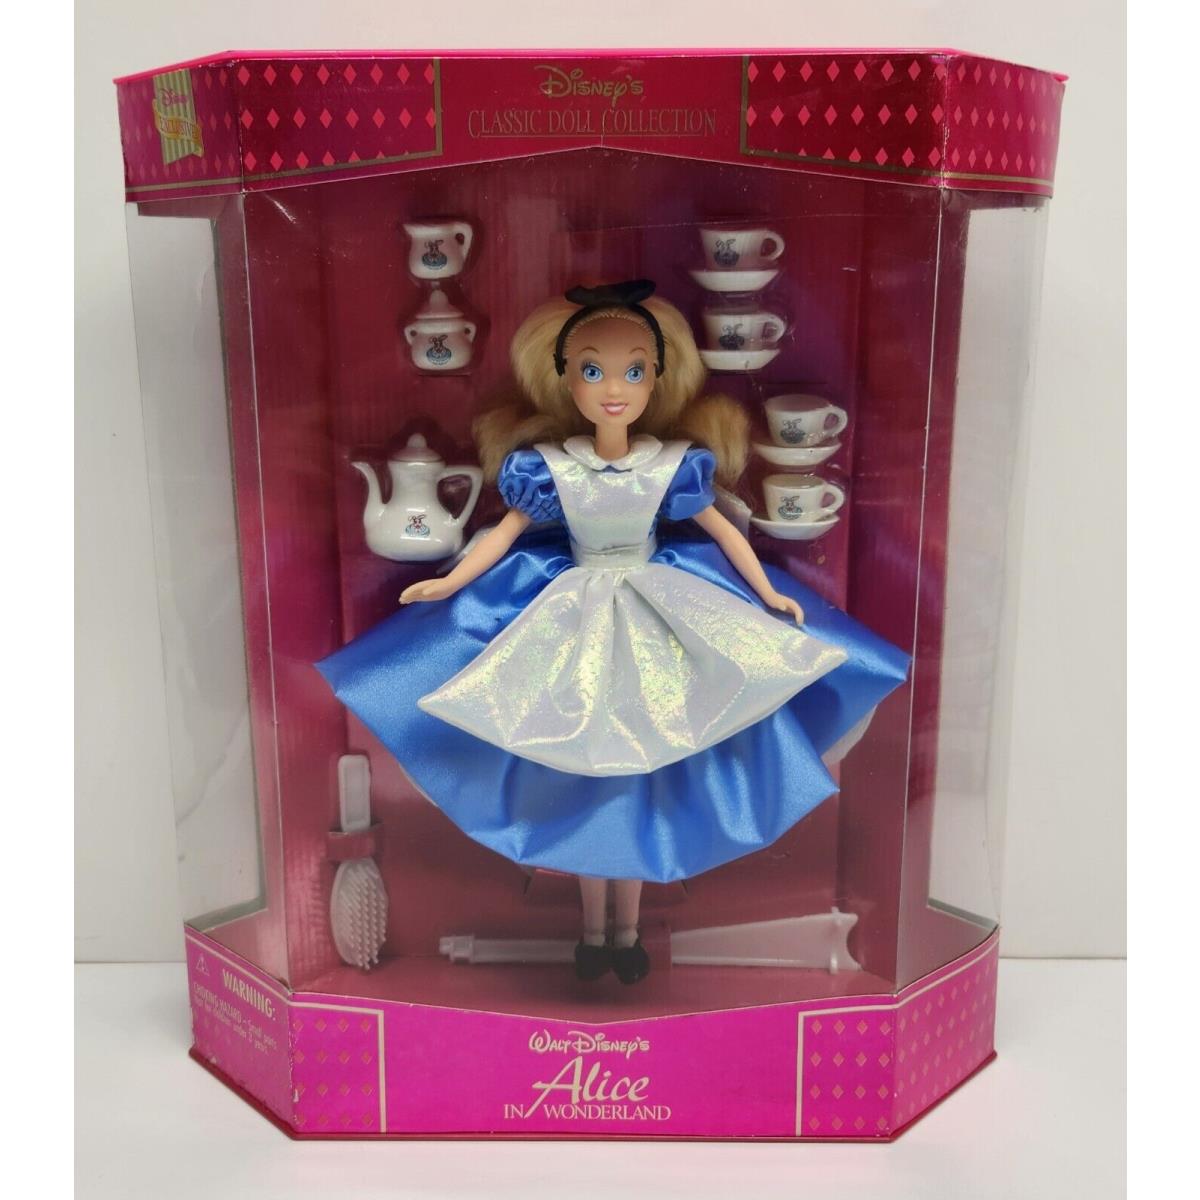 Disney Parks Exclusive Classic Doll Collection Princess Alice in Wonderland Doll